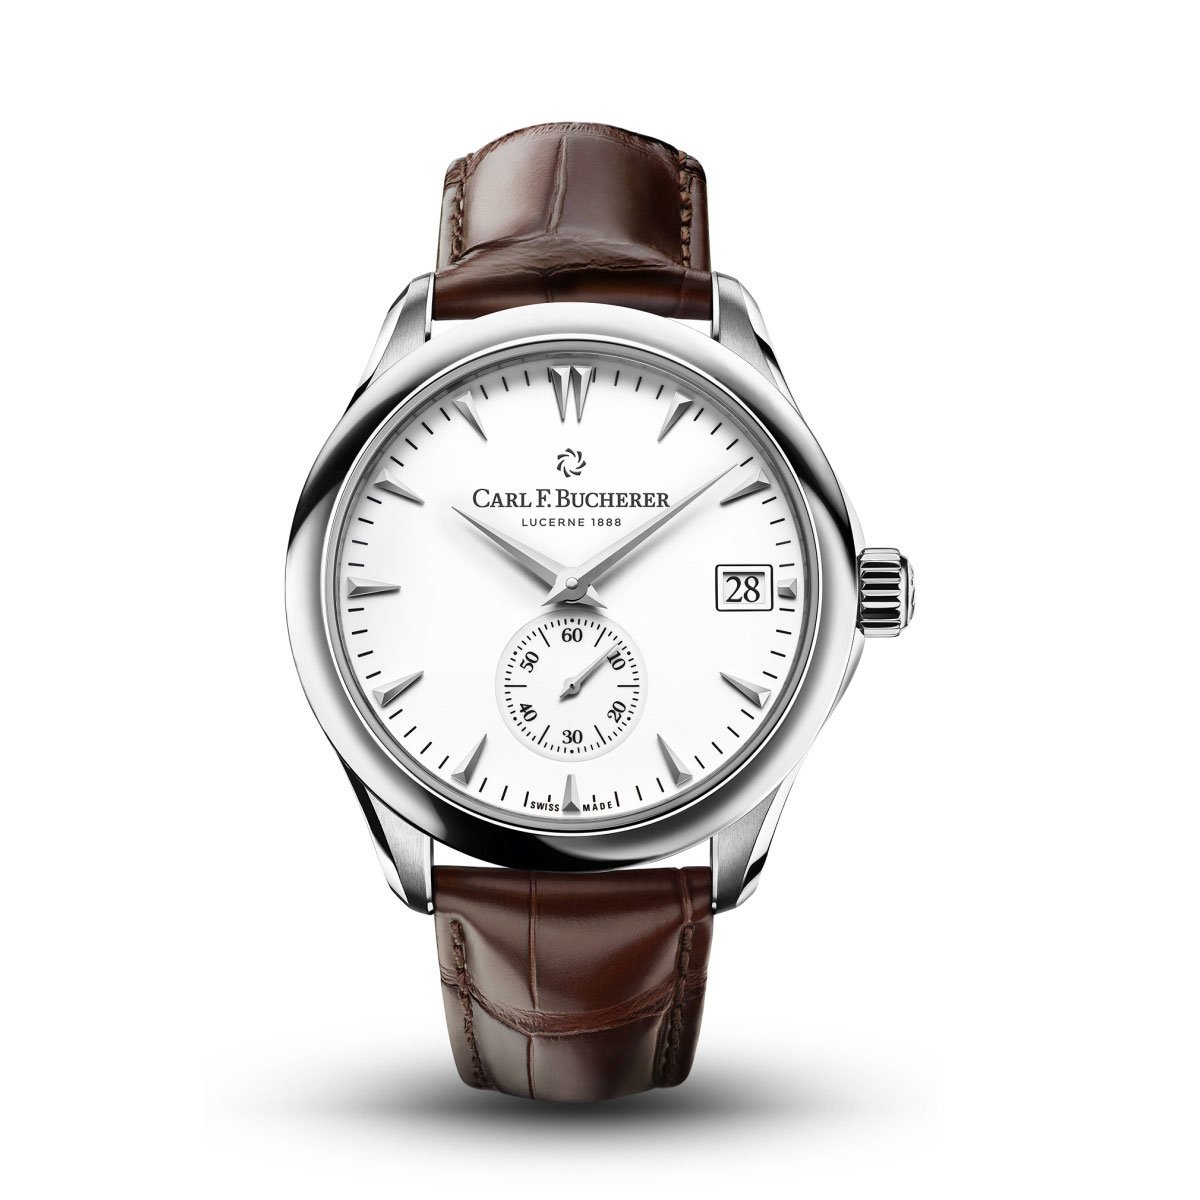  Carl F. Bucherer "Manero" Peripheral Watch With Leather Band